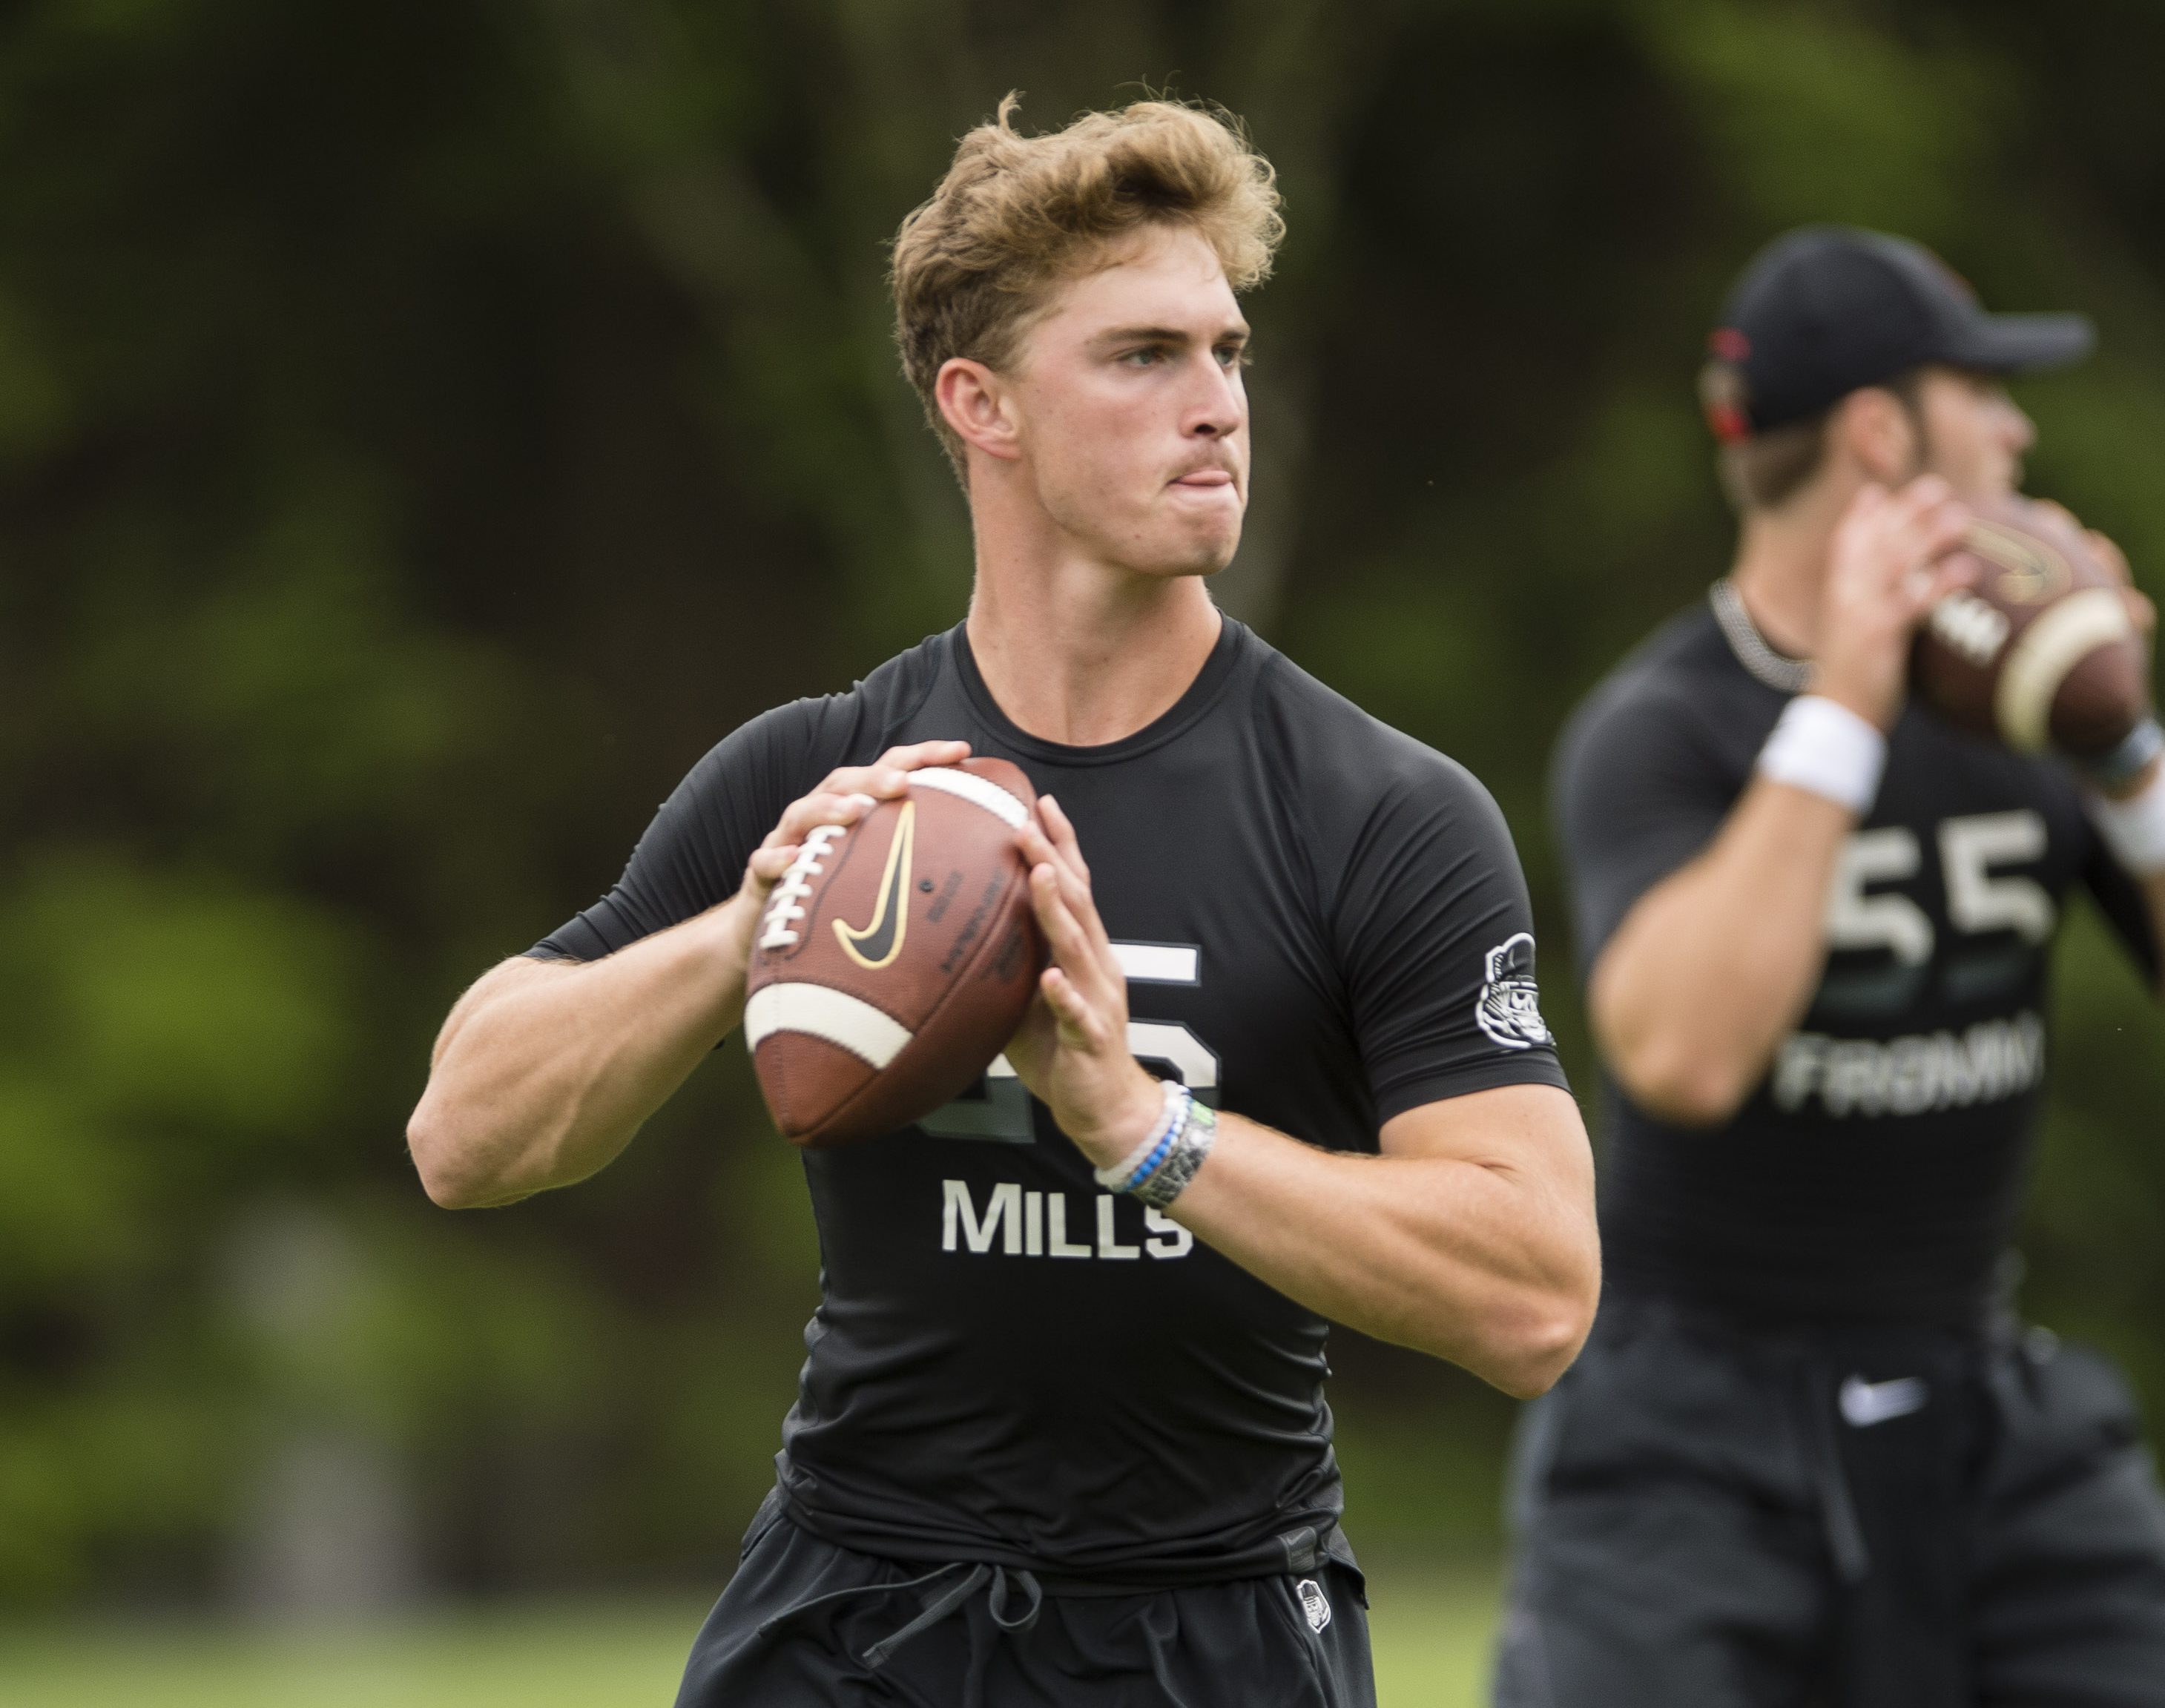 July 8, 2016 -- Beaverton, OR, U.S.A -- Quarterback Davis Mills of Greater Atlantic Christian (Georgia) throws a pass at The Opening and Elite 11 high school football camp held at Nike headquarters in Oregon. -- Photo by Troy Wayrynen-USA TODAY Sports Images, Gannett ORG XMIT: US 135130 opening/ elite 1 7/6/ [Via MerlinFTP Drop]